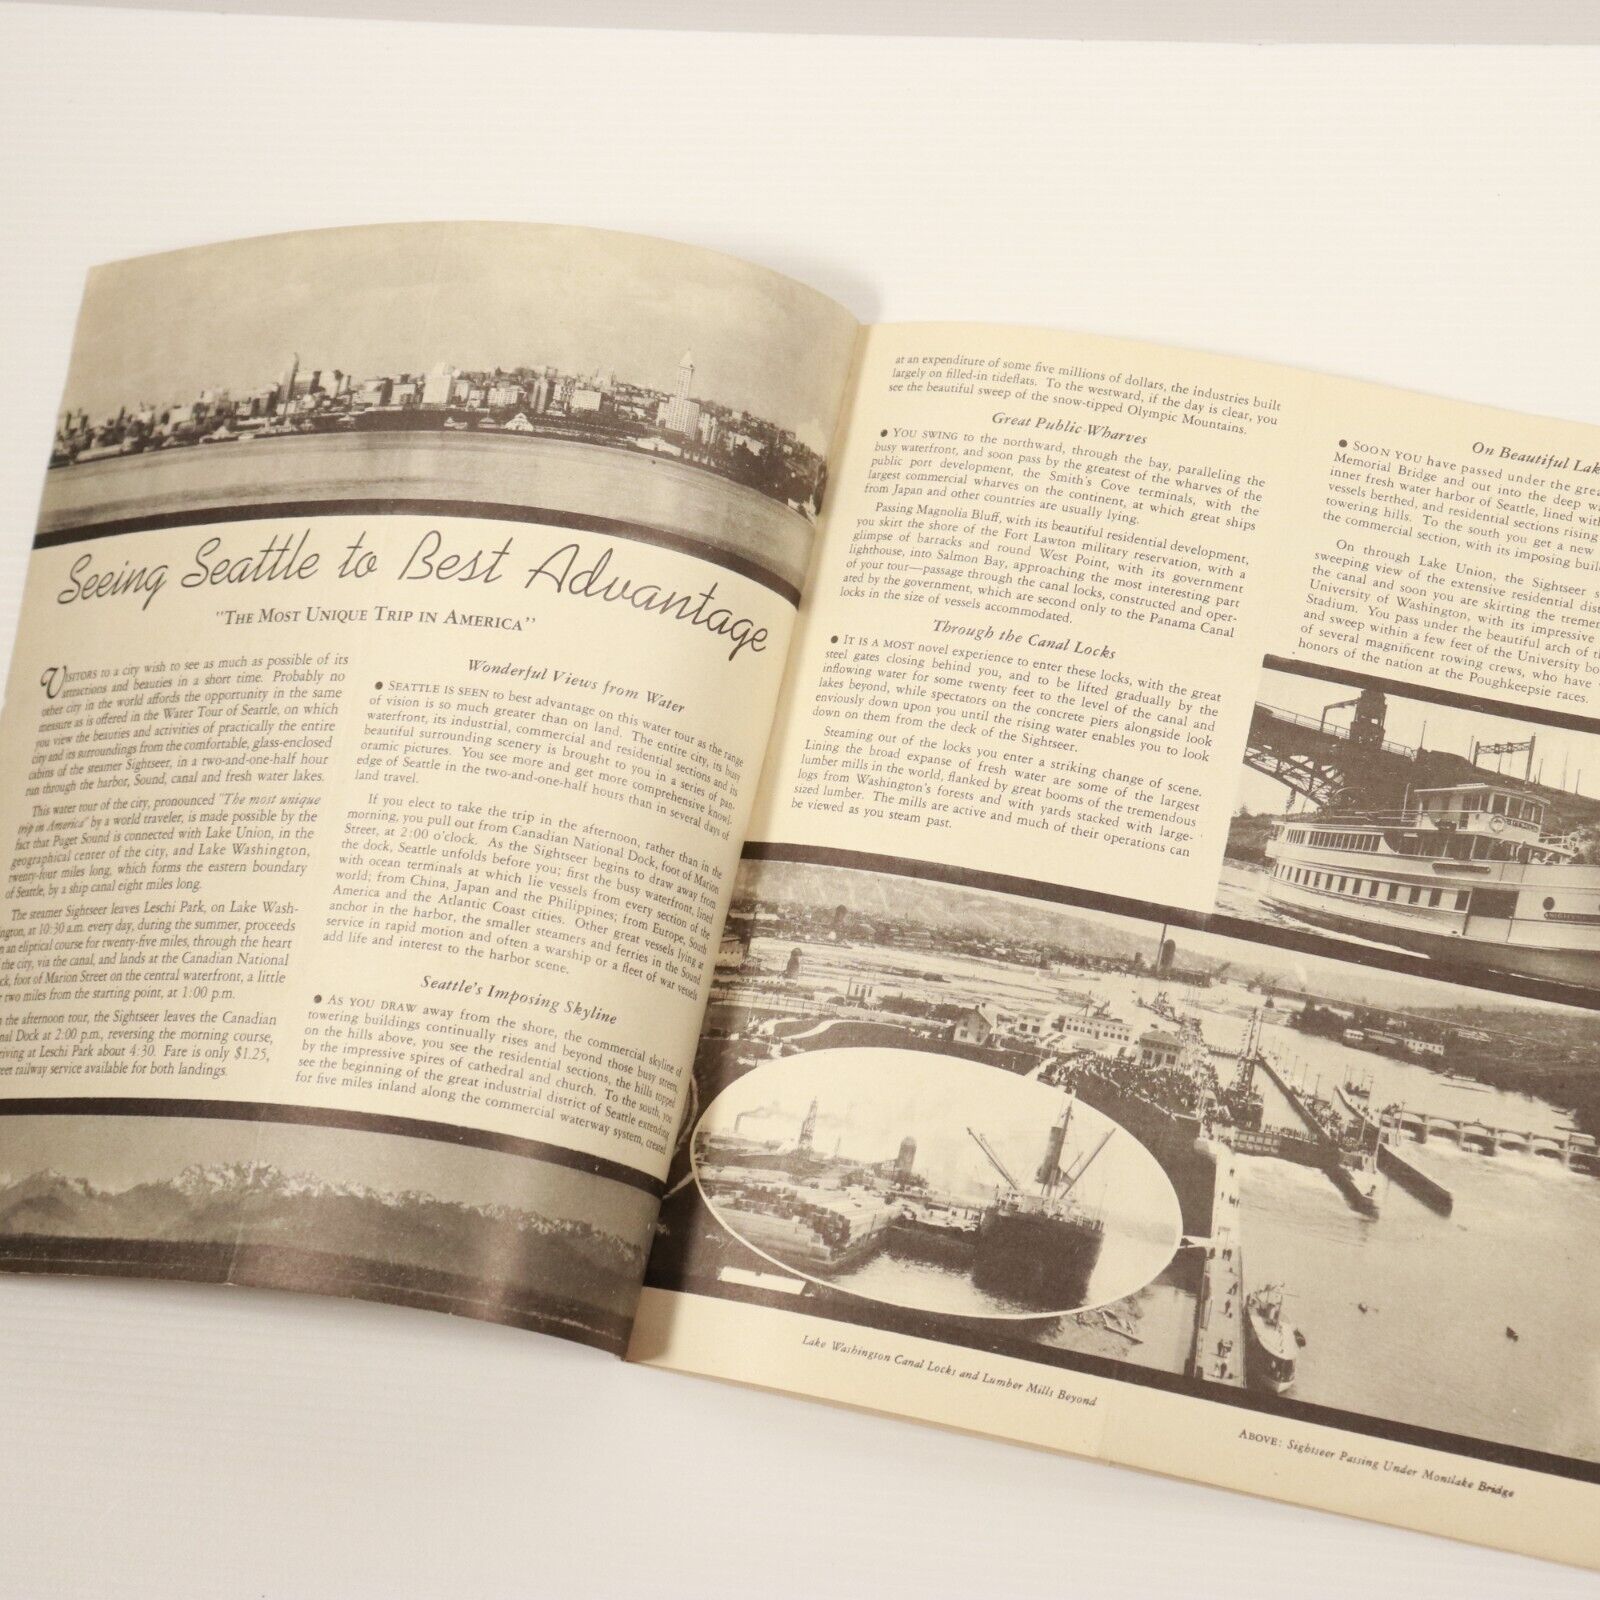 c1935 Seeing Seattle By Water American Tourism Brochure Anderson Water Tours